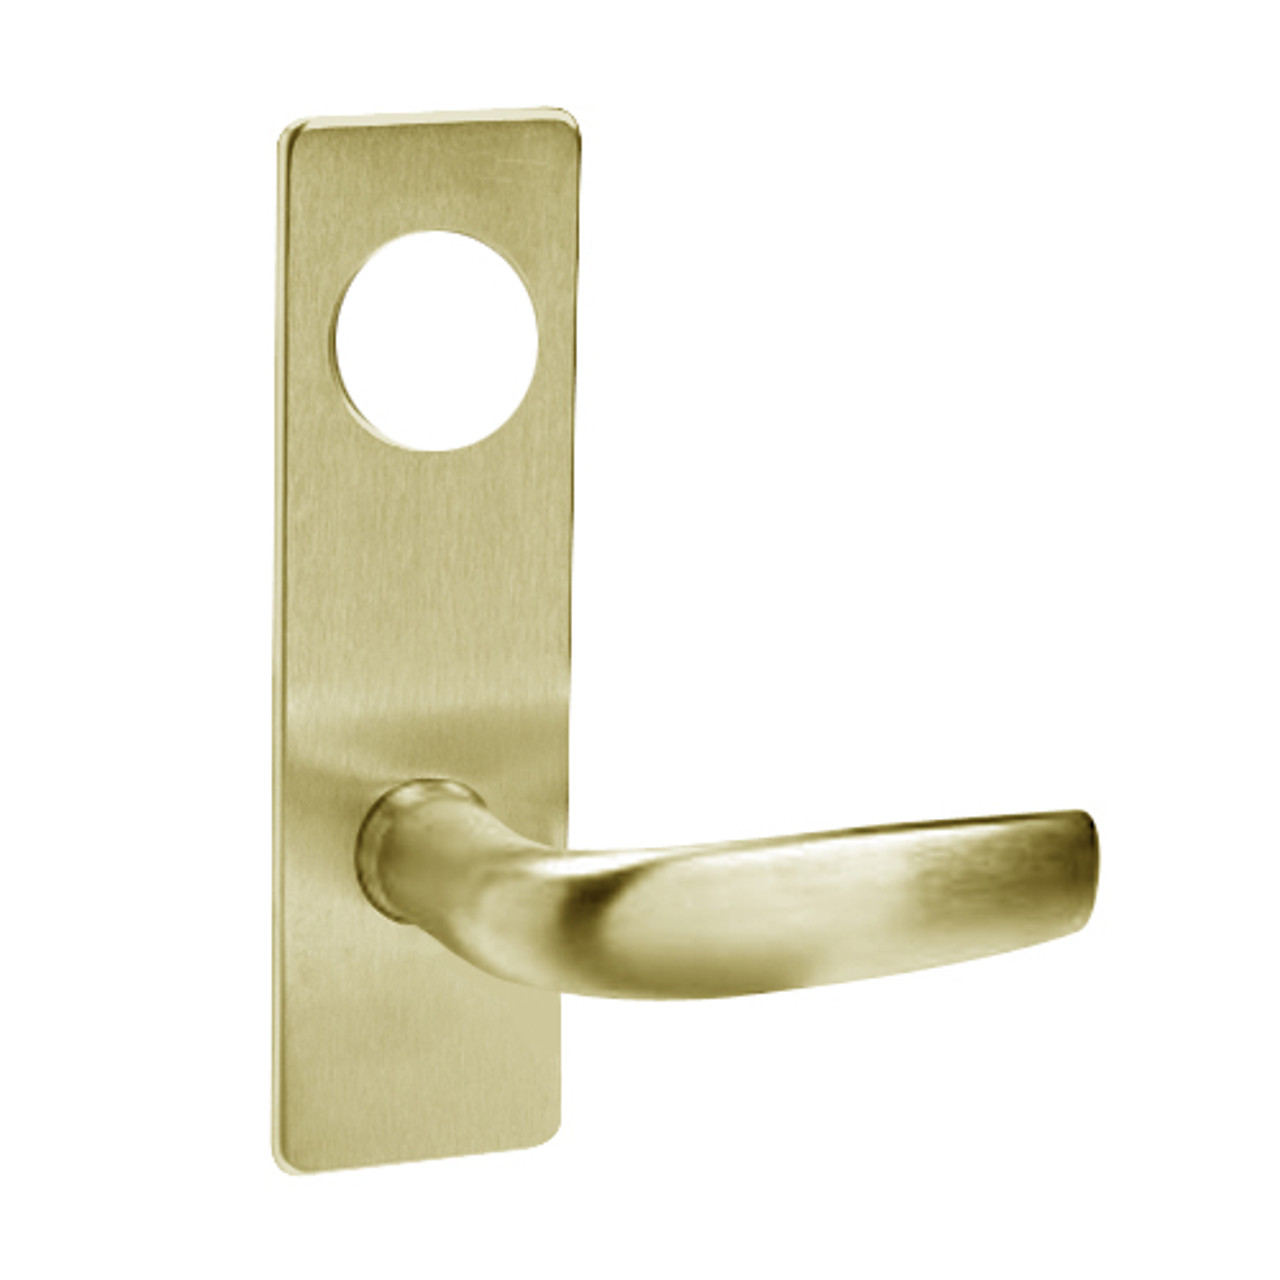 ML2051-CSR-606-CL7 Corbin Russwin ML2000 Series IC 7-Pin Less Core Mortise Office Locksets with Citation Lever in Satin Brass